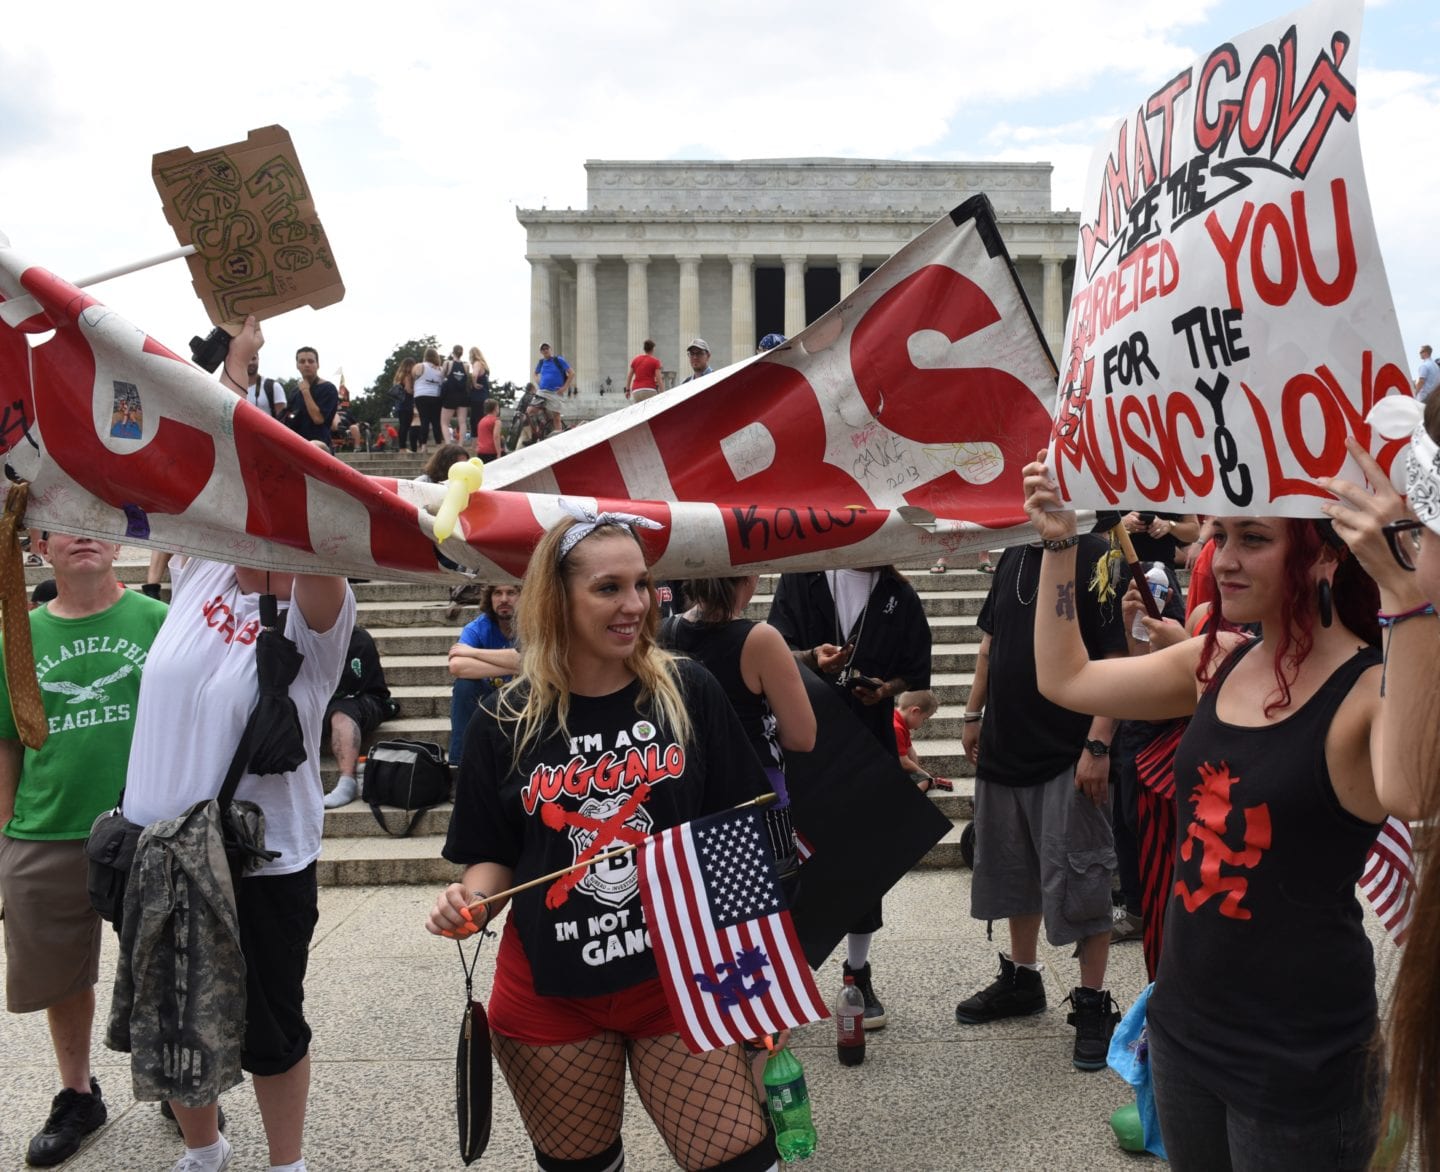 71 Wild Photos From The Juggalo March On Washington Dc Live Music Blog 6816